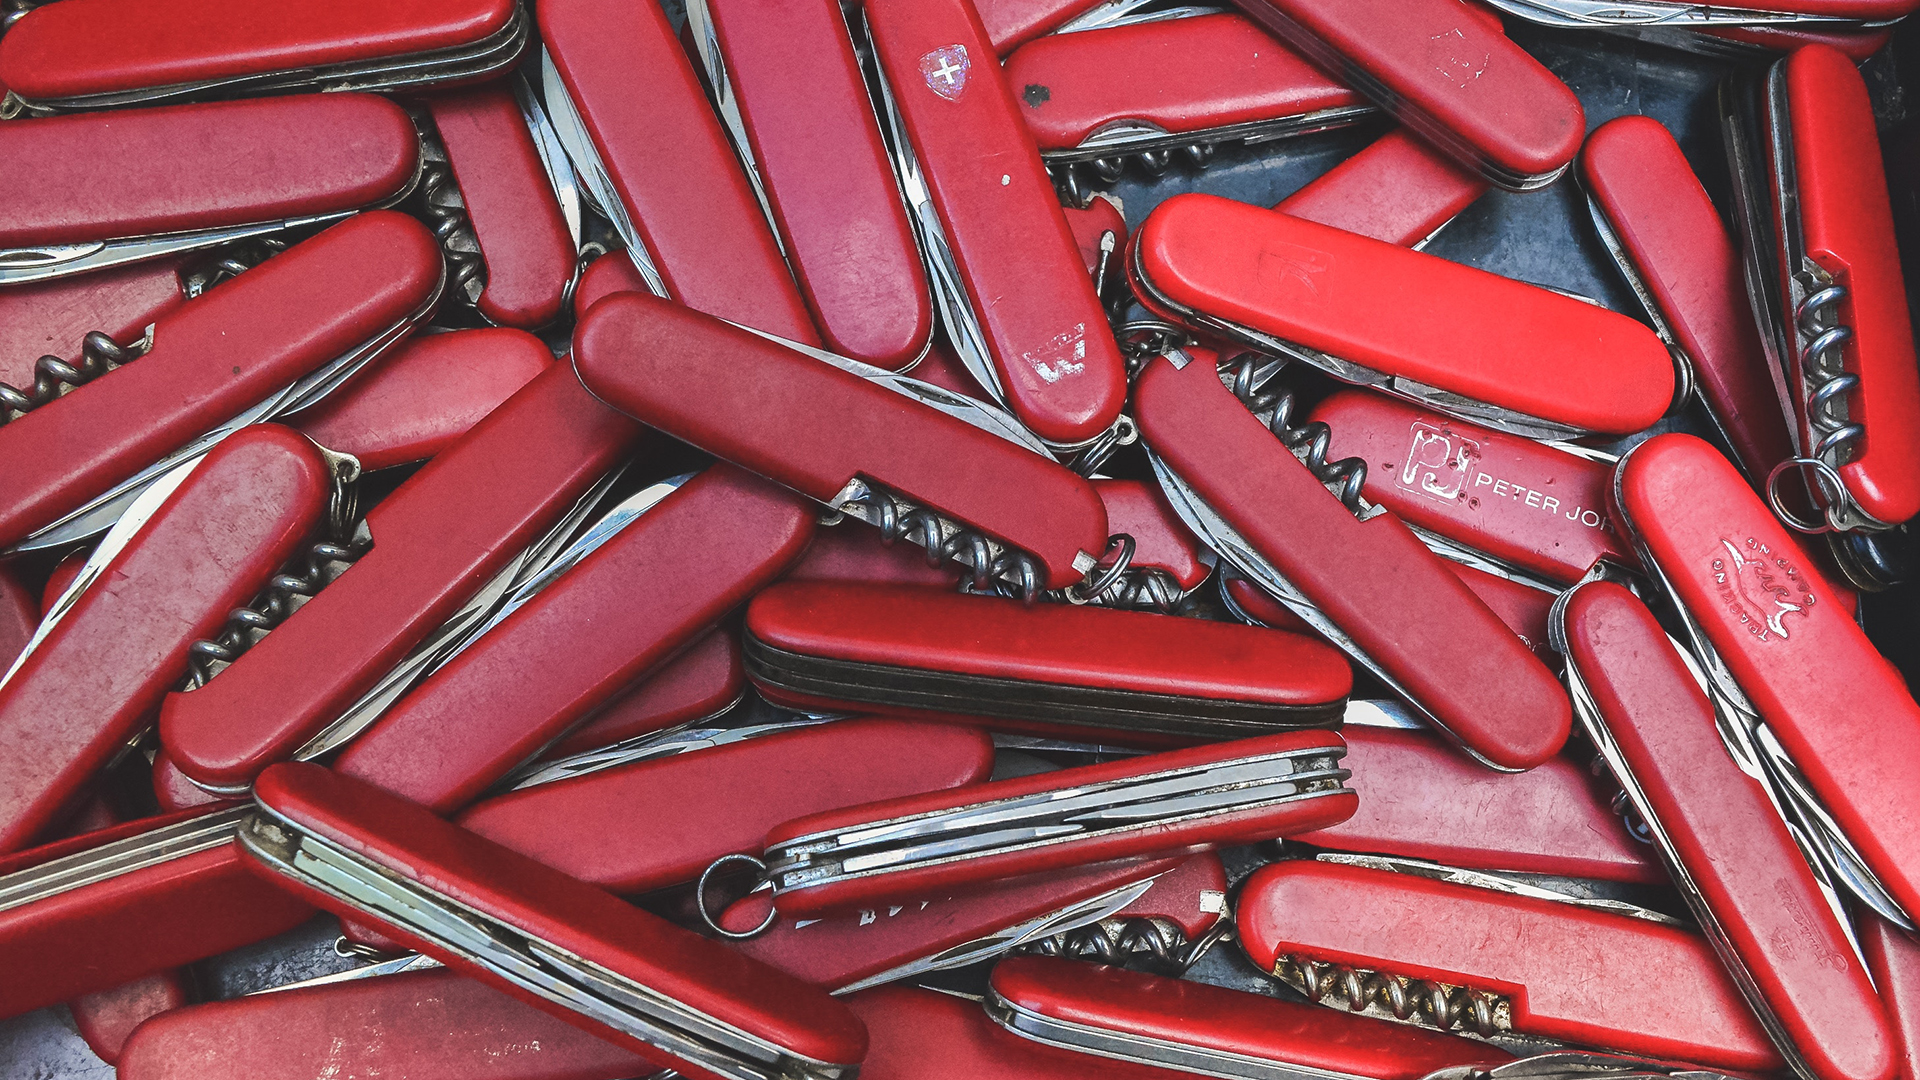 countless Swiss Army knives